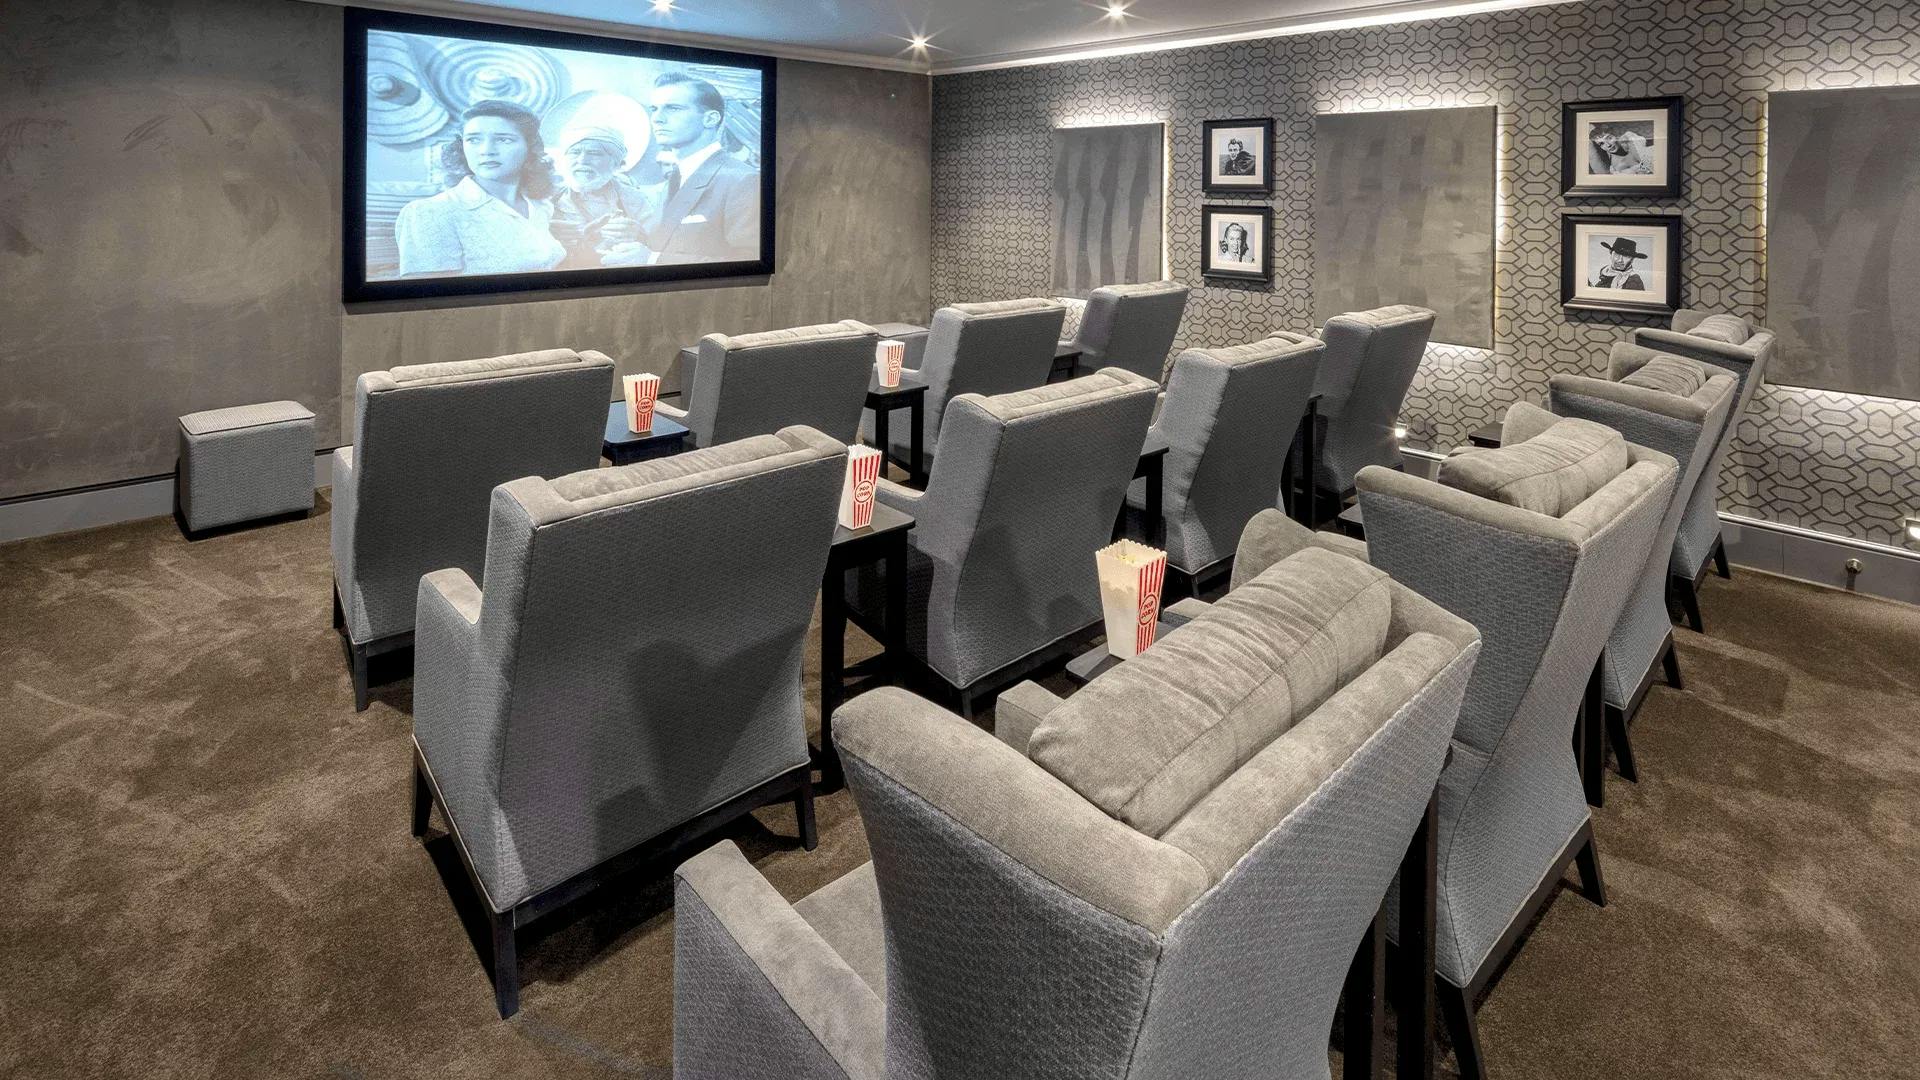 Cinema of Butlers Mews Care Home in Rugby, Warwickshire